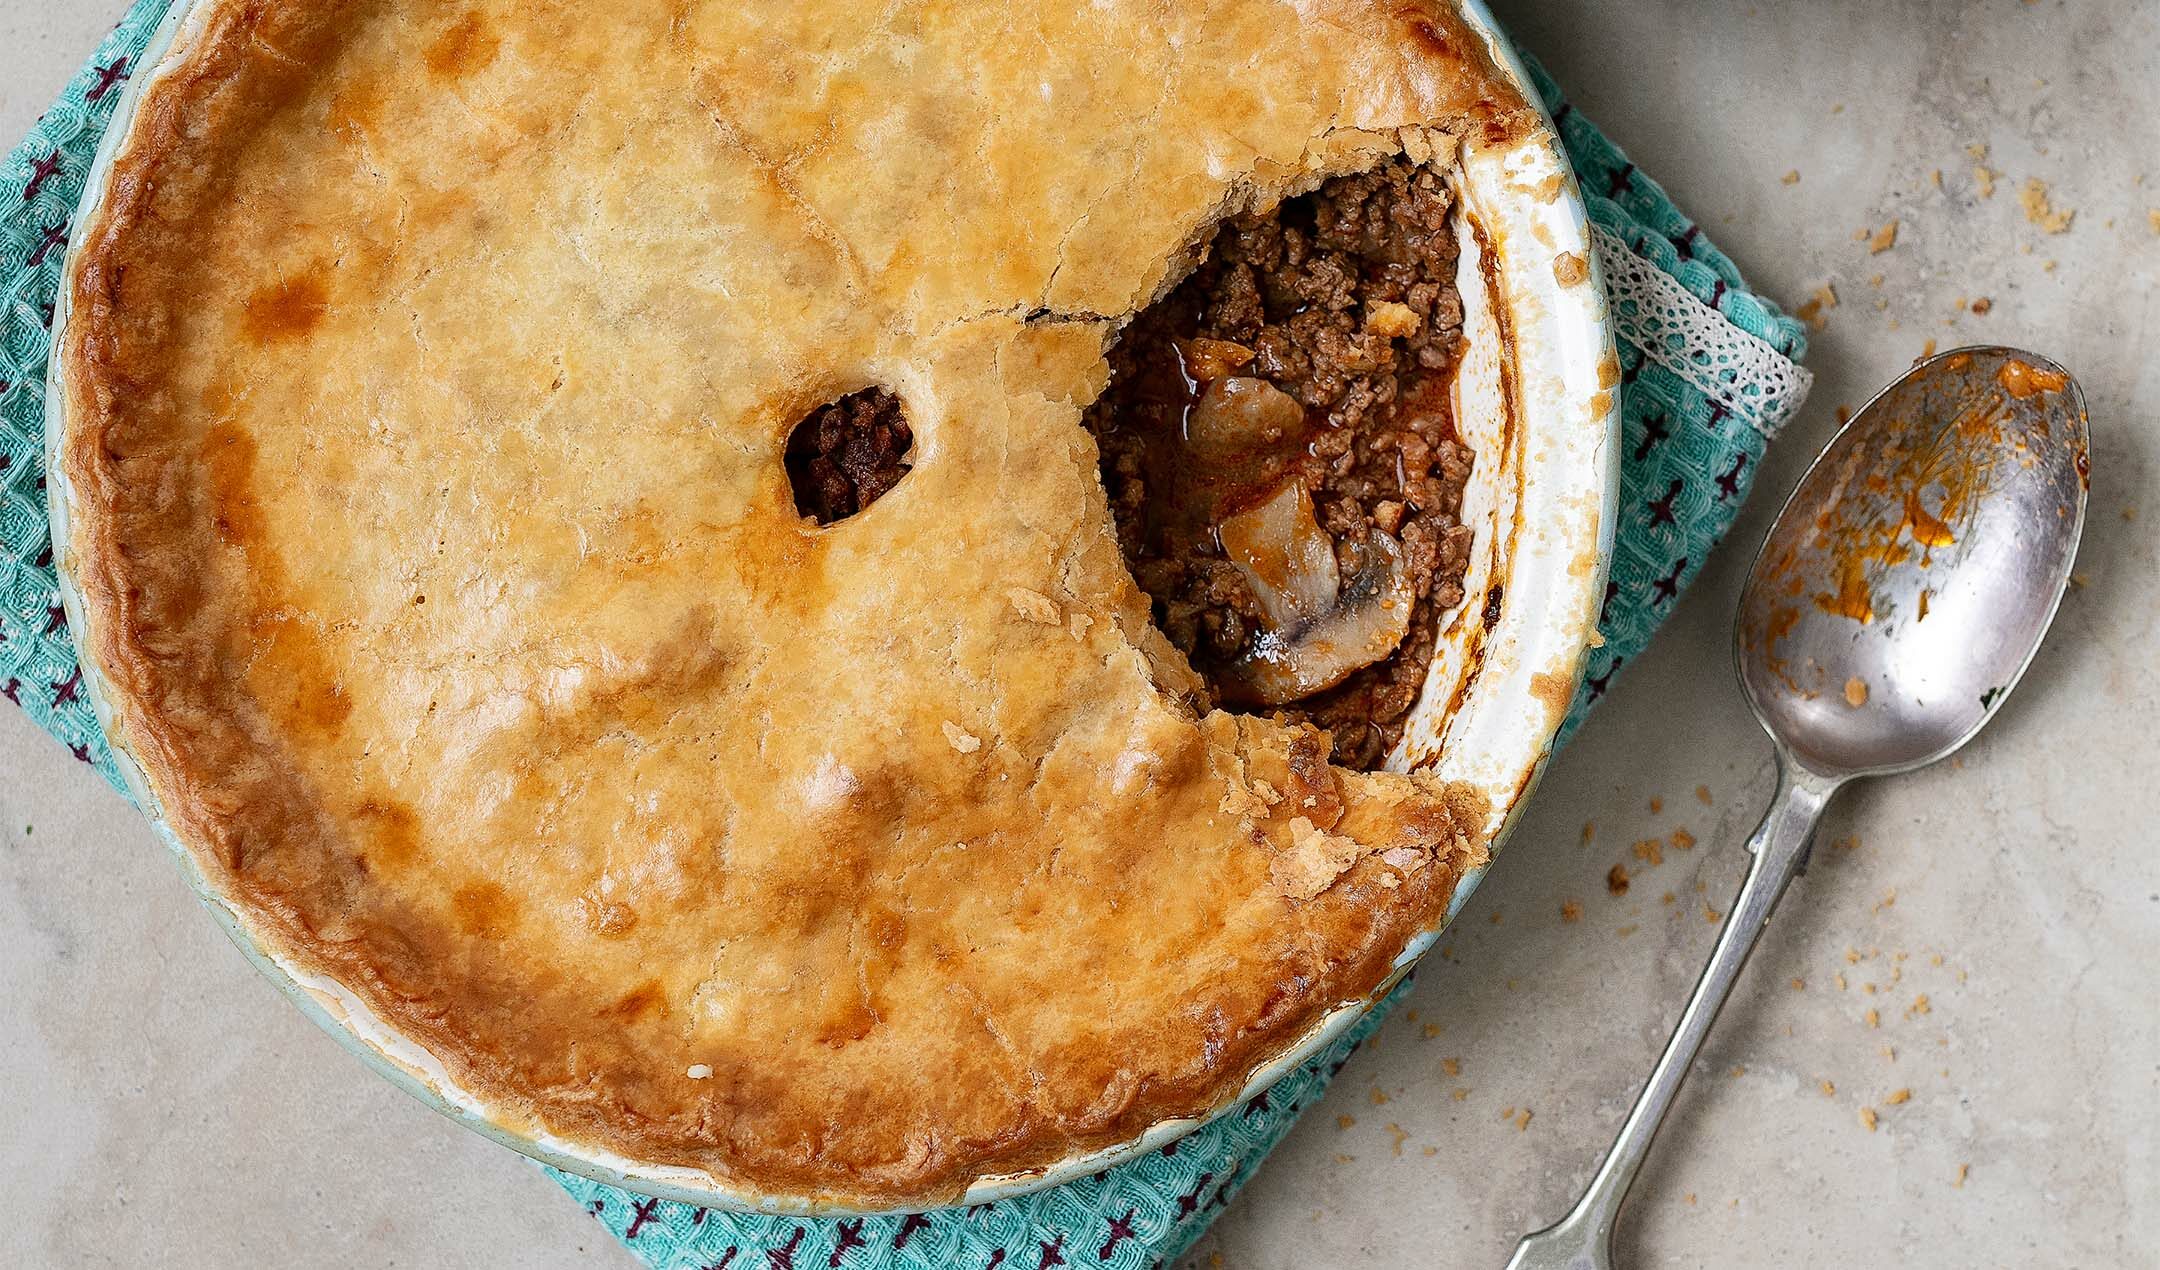 https://easyfood.ie/wp-content/uploads/2023/01/minced-beef-and-onion-pie_banner-image-2160x1270.jpg